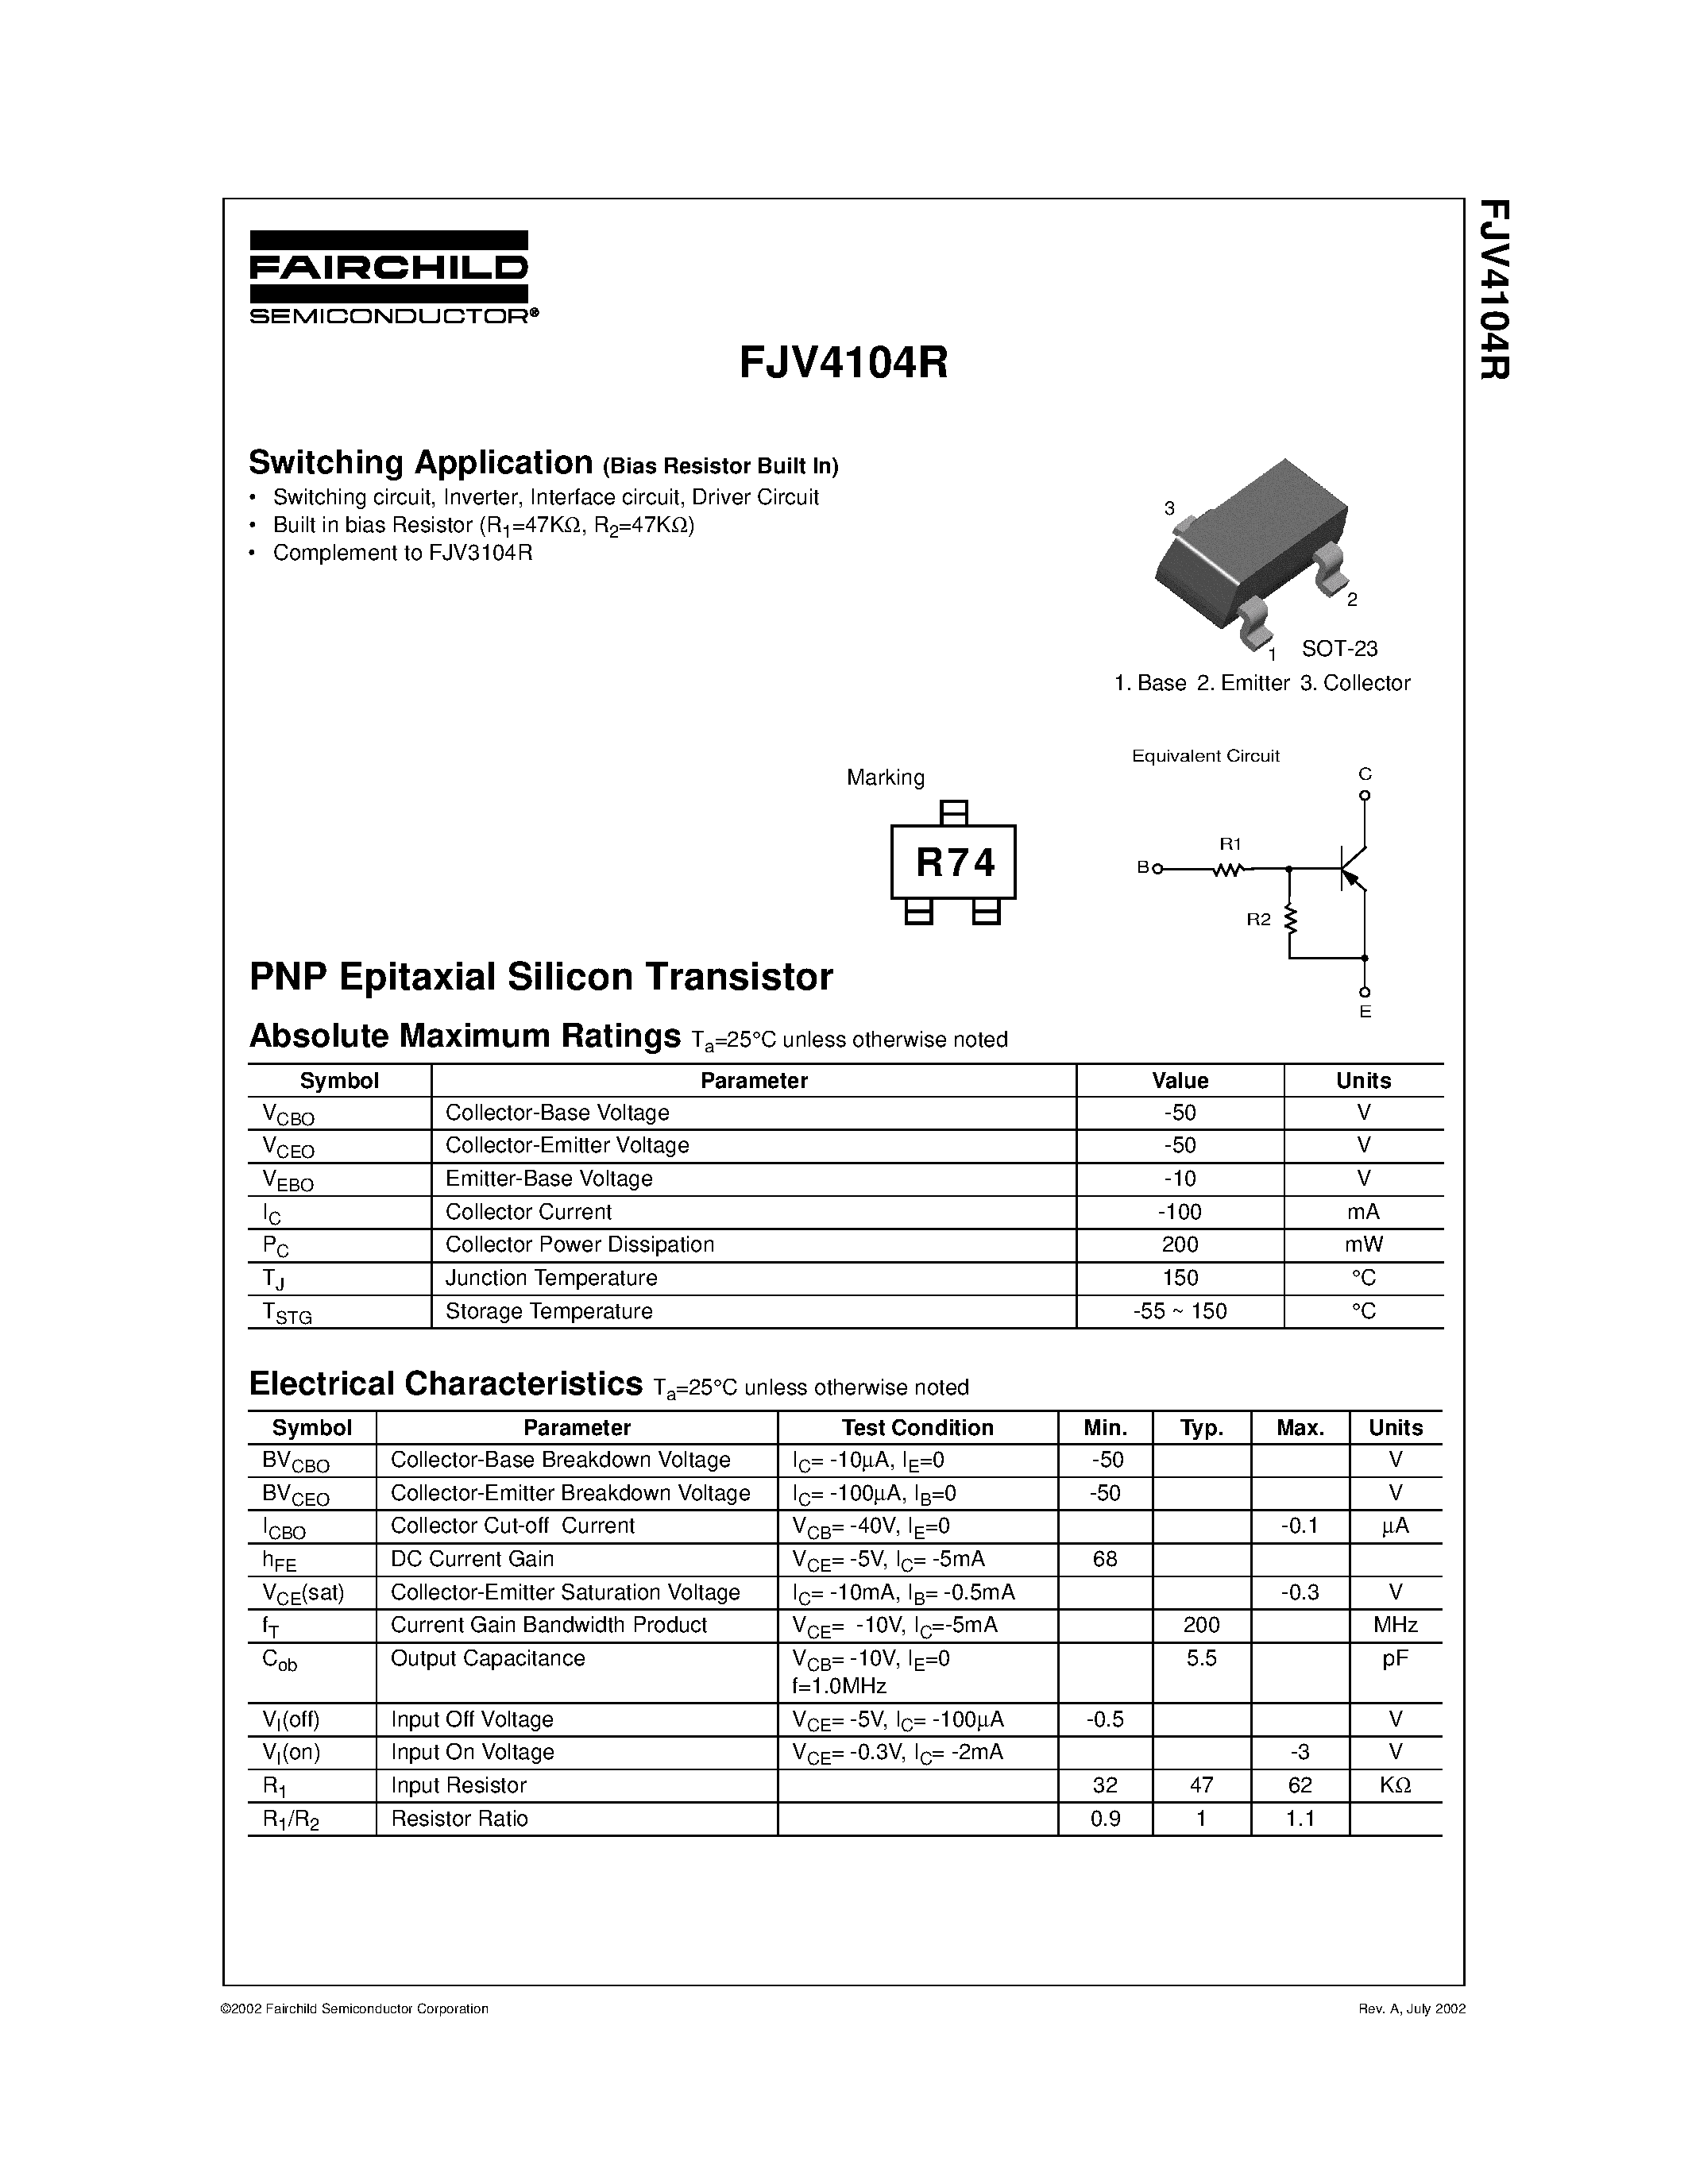 Даташит FJV4104 - PNP Epitaxial Silicon Transistor страница 1